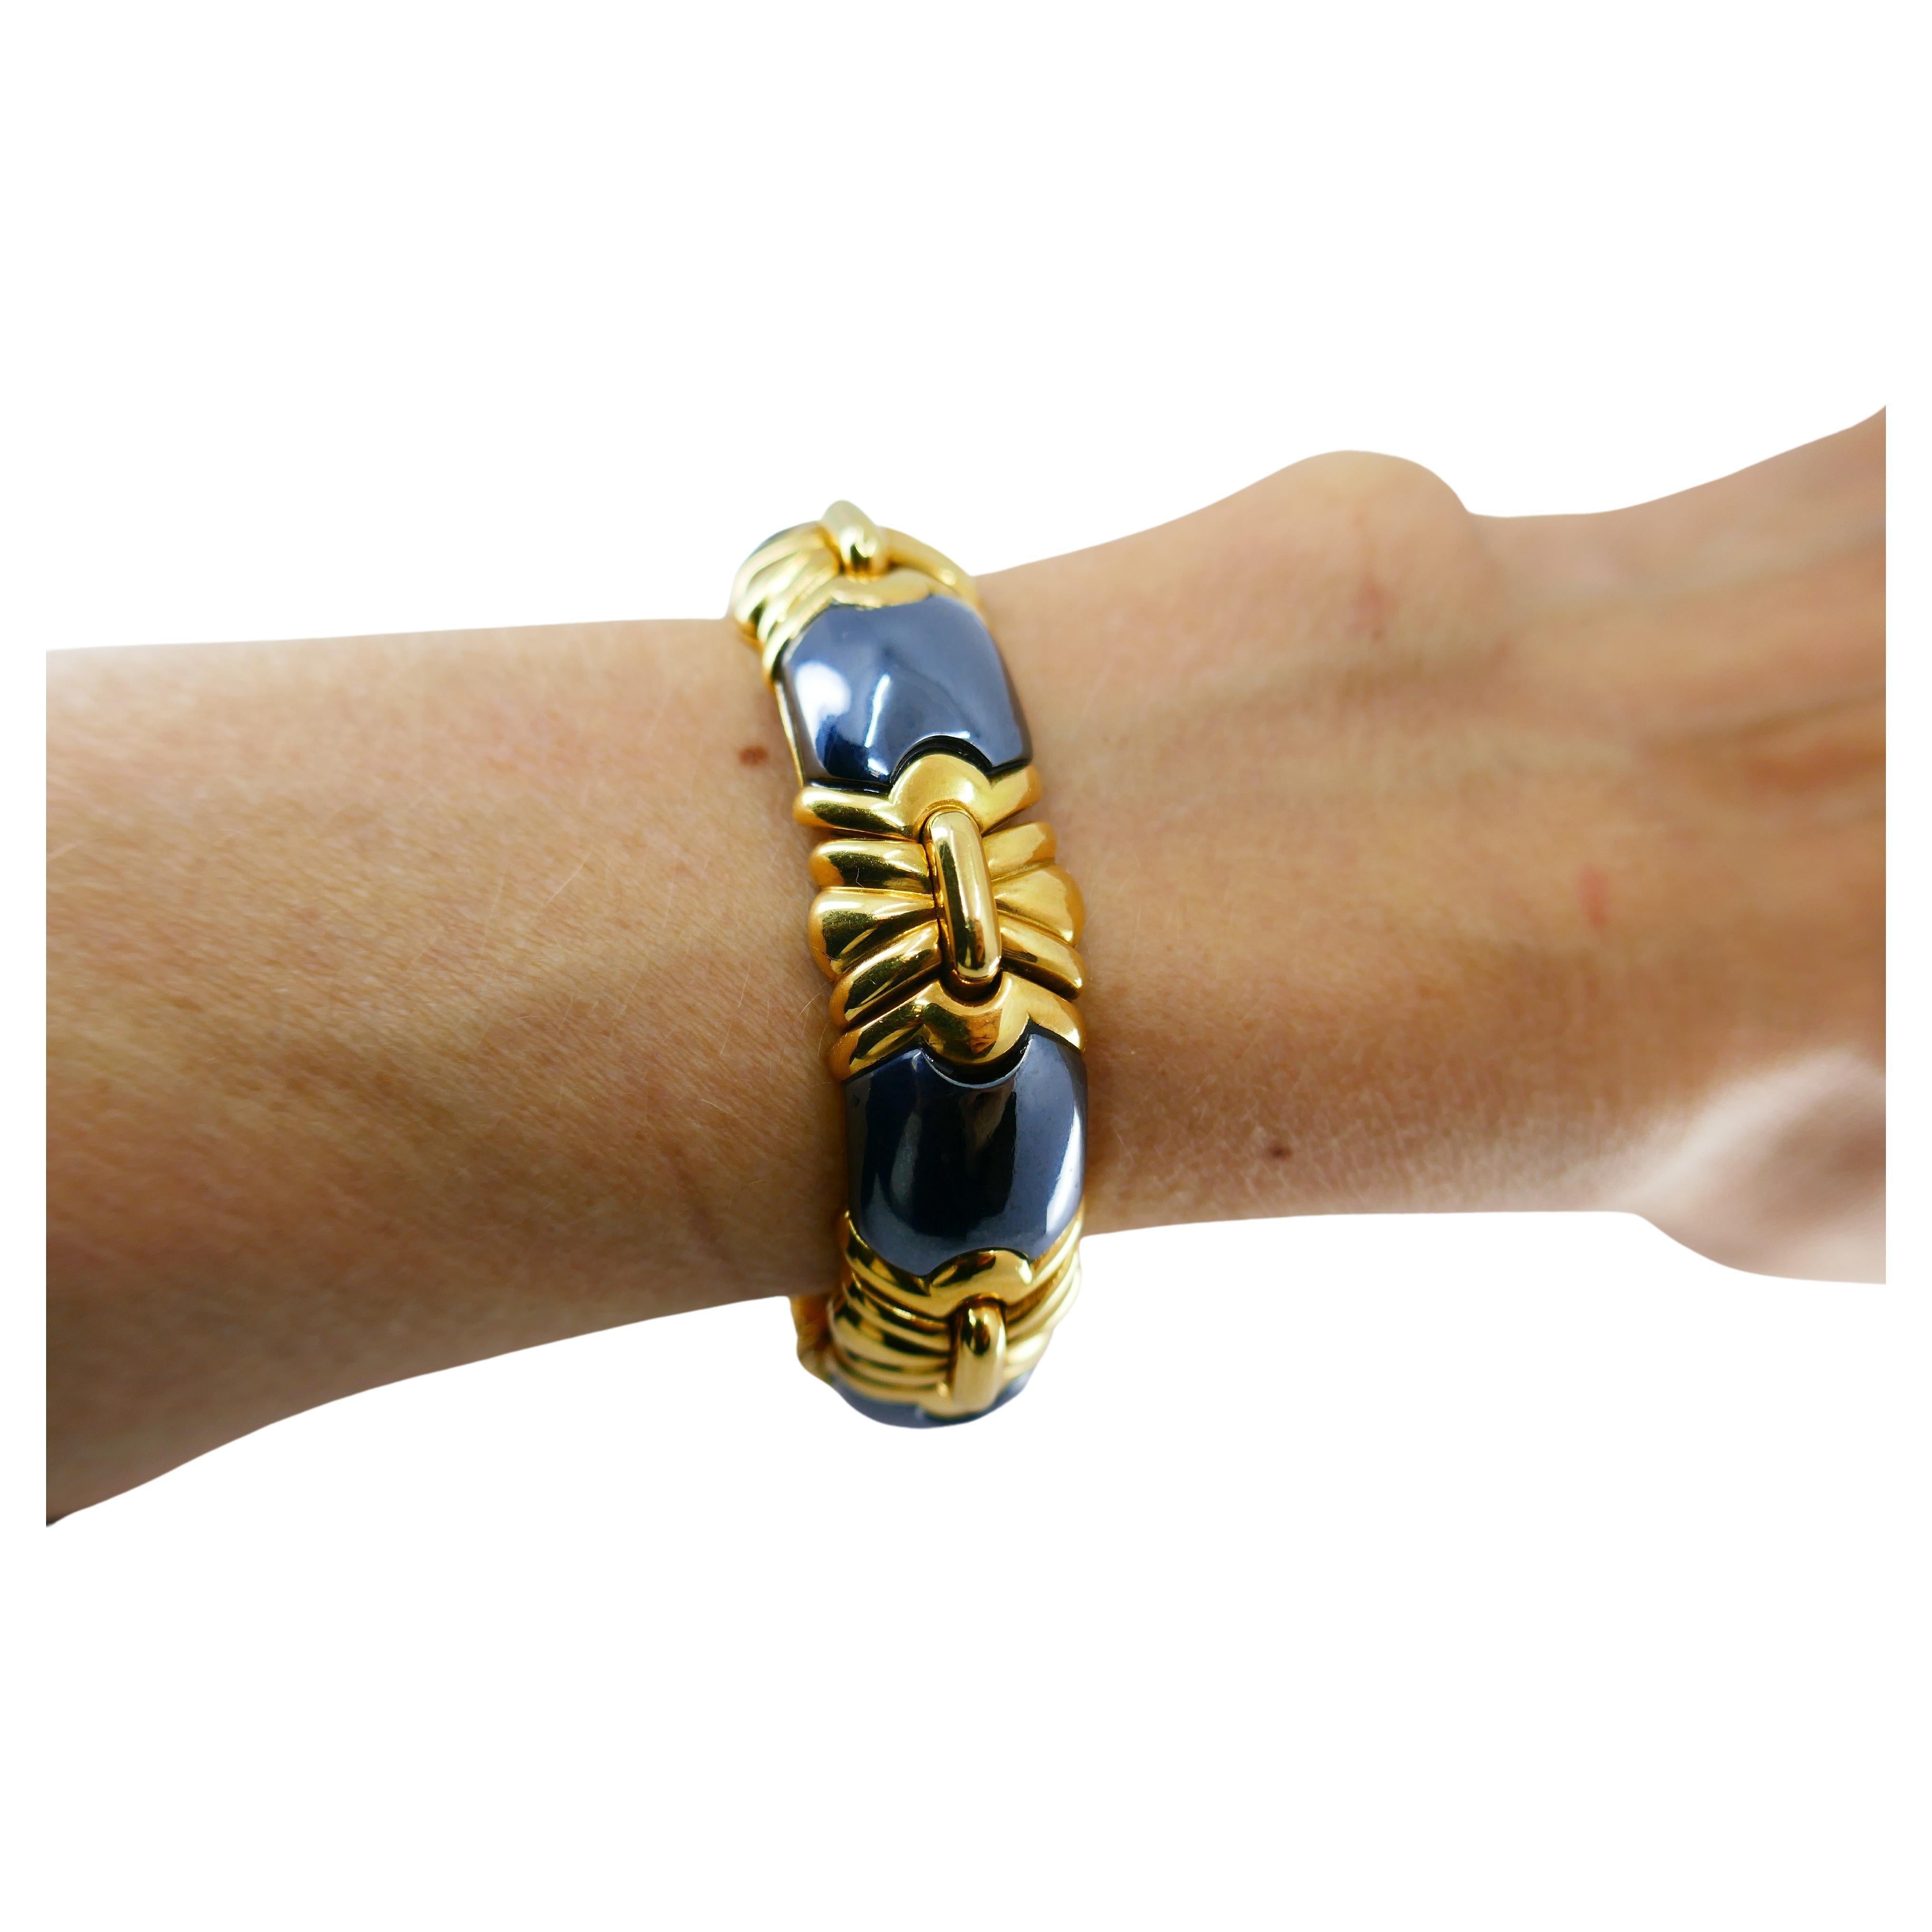 A stunning Bulgari bracelet made of 18k gold and hematite. The pattern is built out of the hi-polished gold elements alternated with geometrical hematite pieces. The latter are rather flat, and the gold 